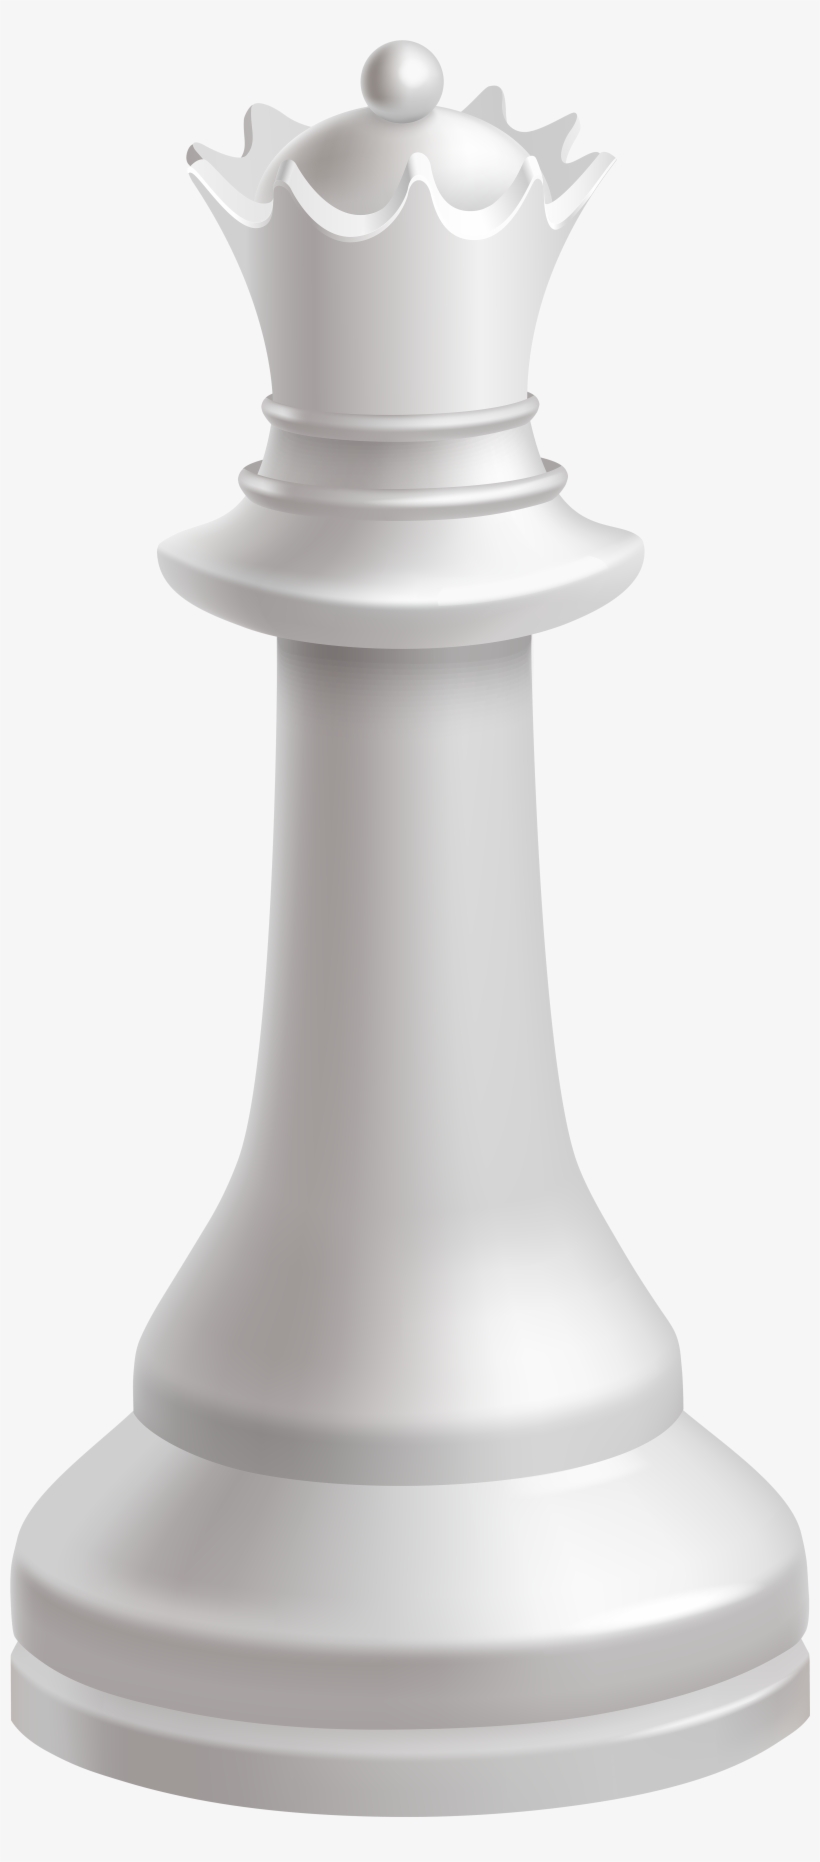 Free Png Queen White Chess Piece Png Images Transparent - King Chess ...